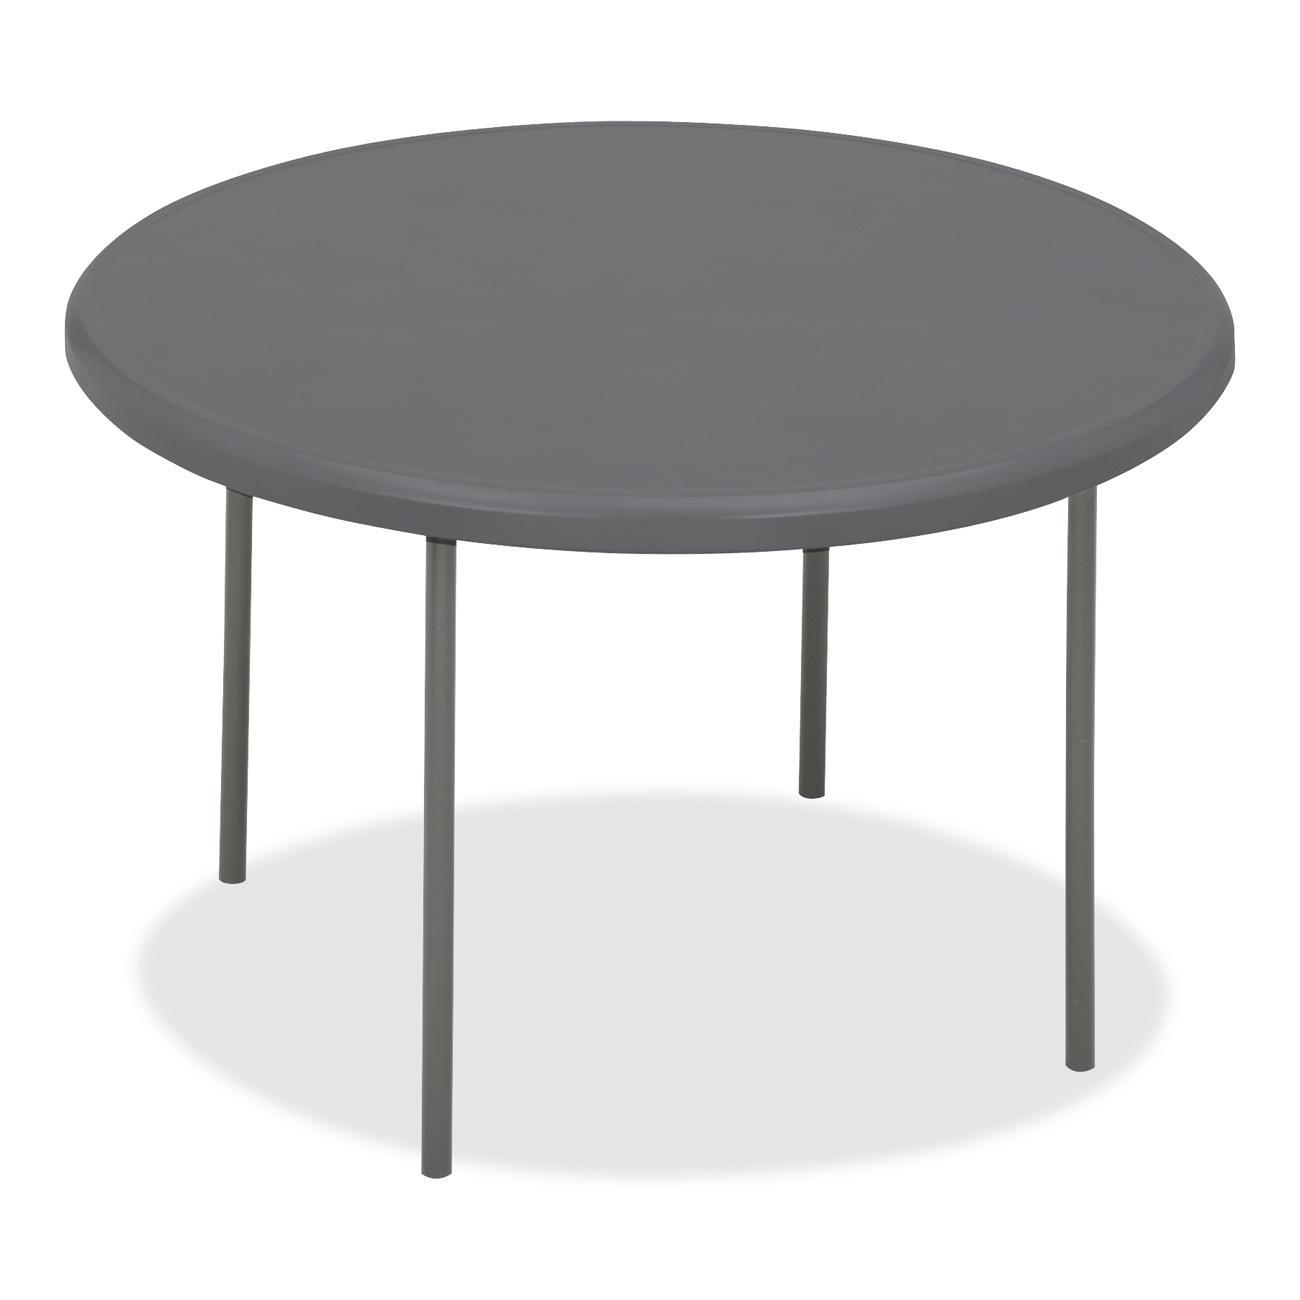 Iceberg 65247 IndestrucTable TOO 1200 Series Resin Folding Table, 48 dia x 29h, Charcoal